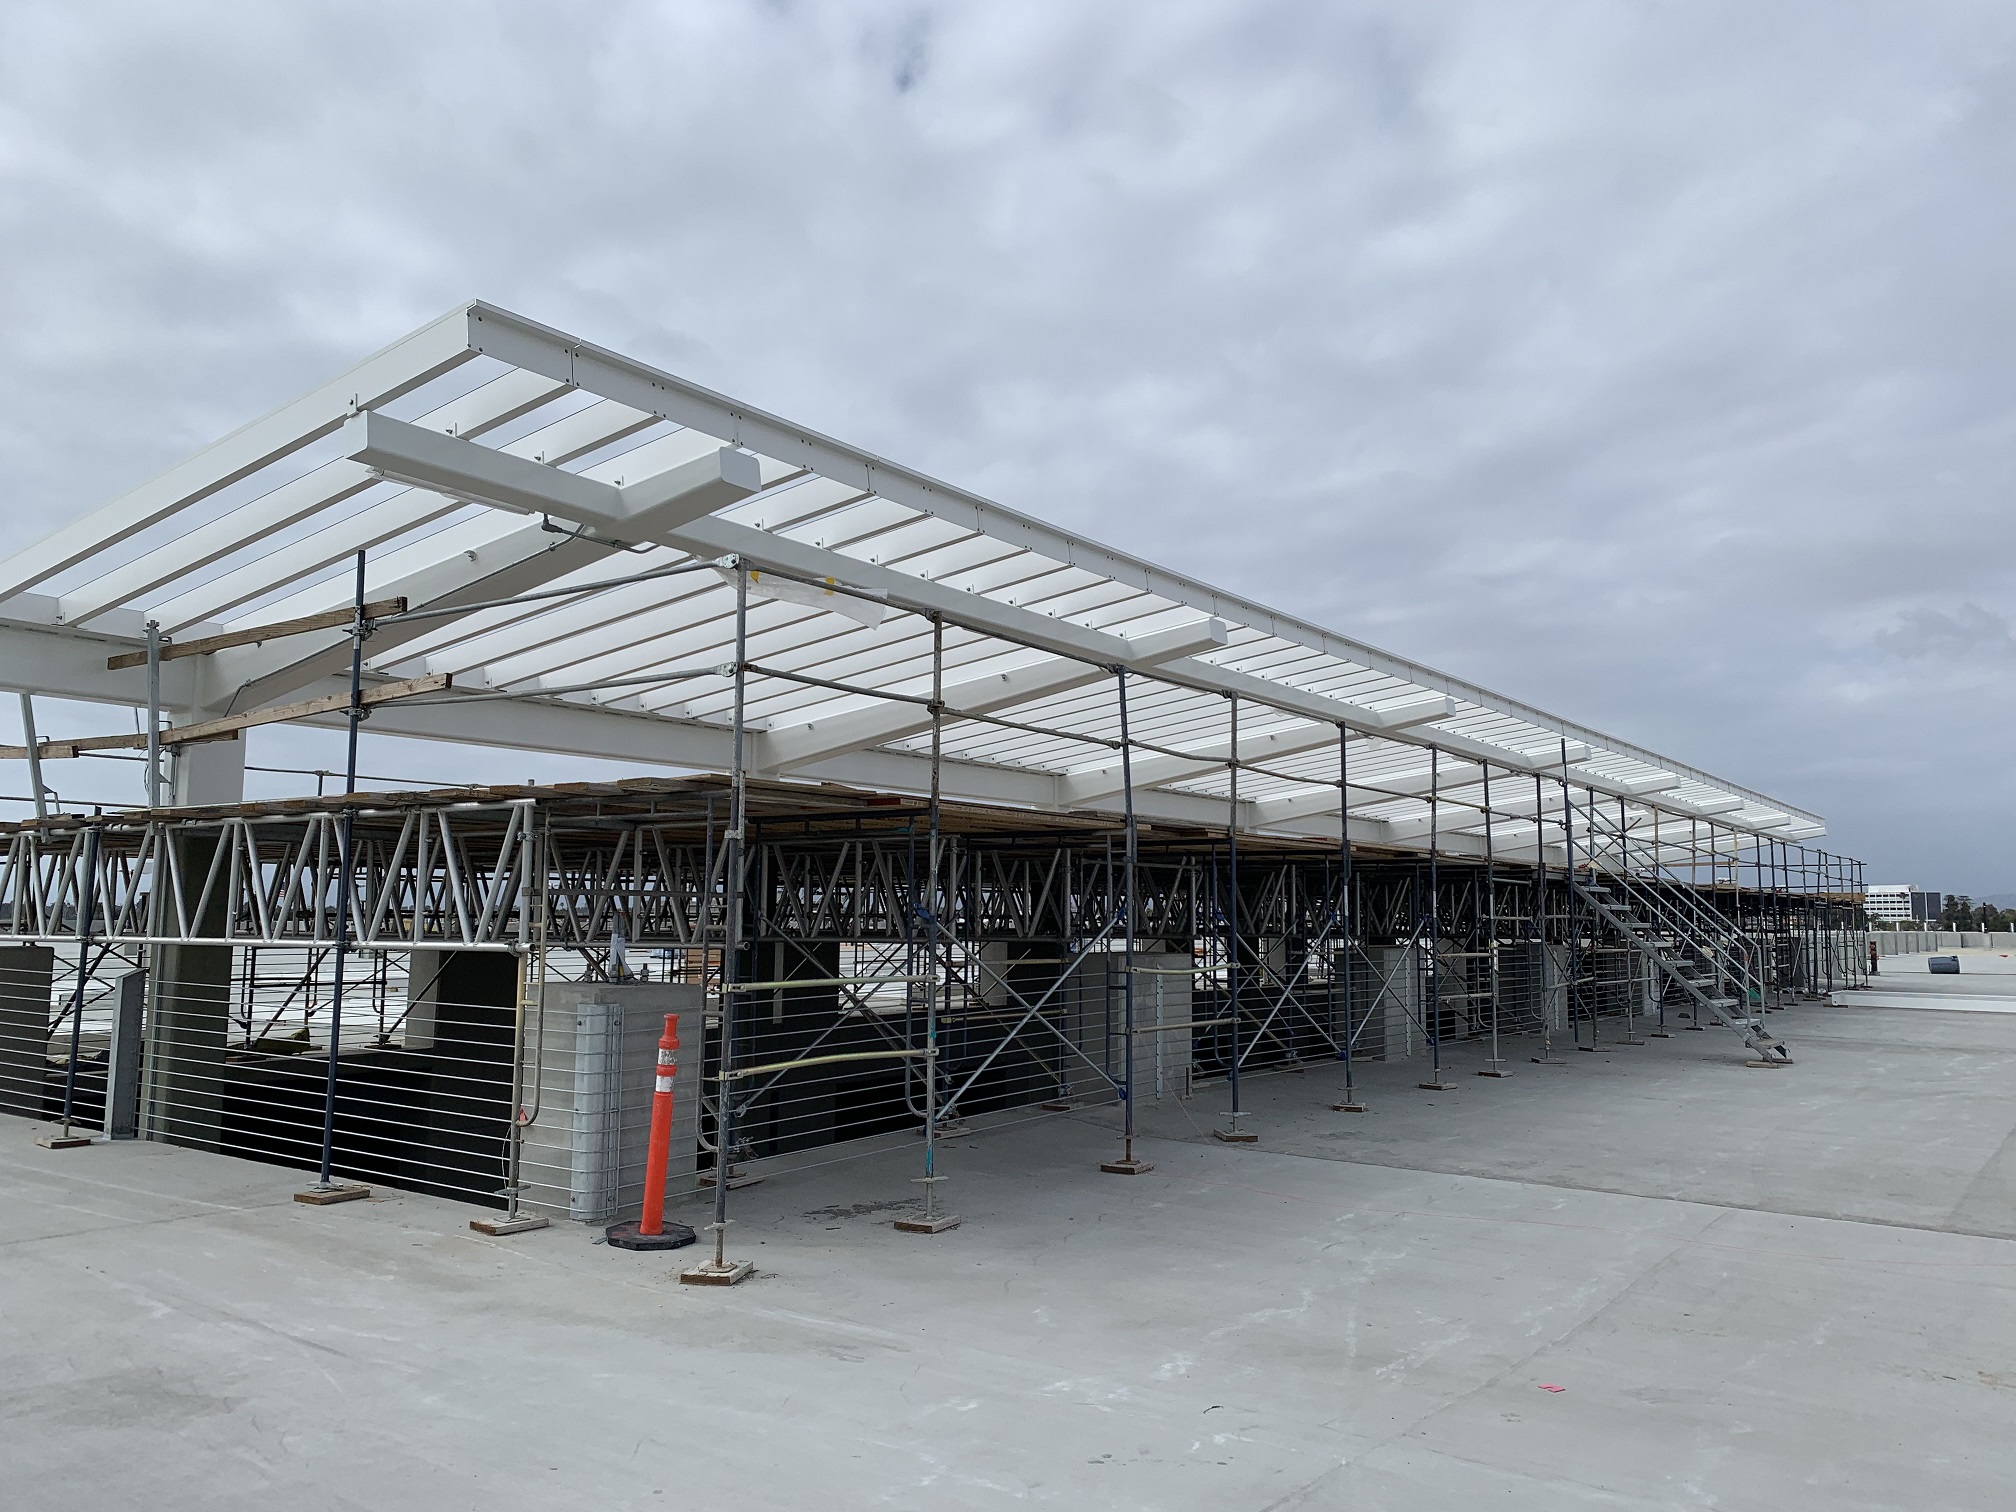 Escalator canopy construction continues at the Intermodal Transportation Facility-West.